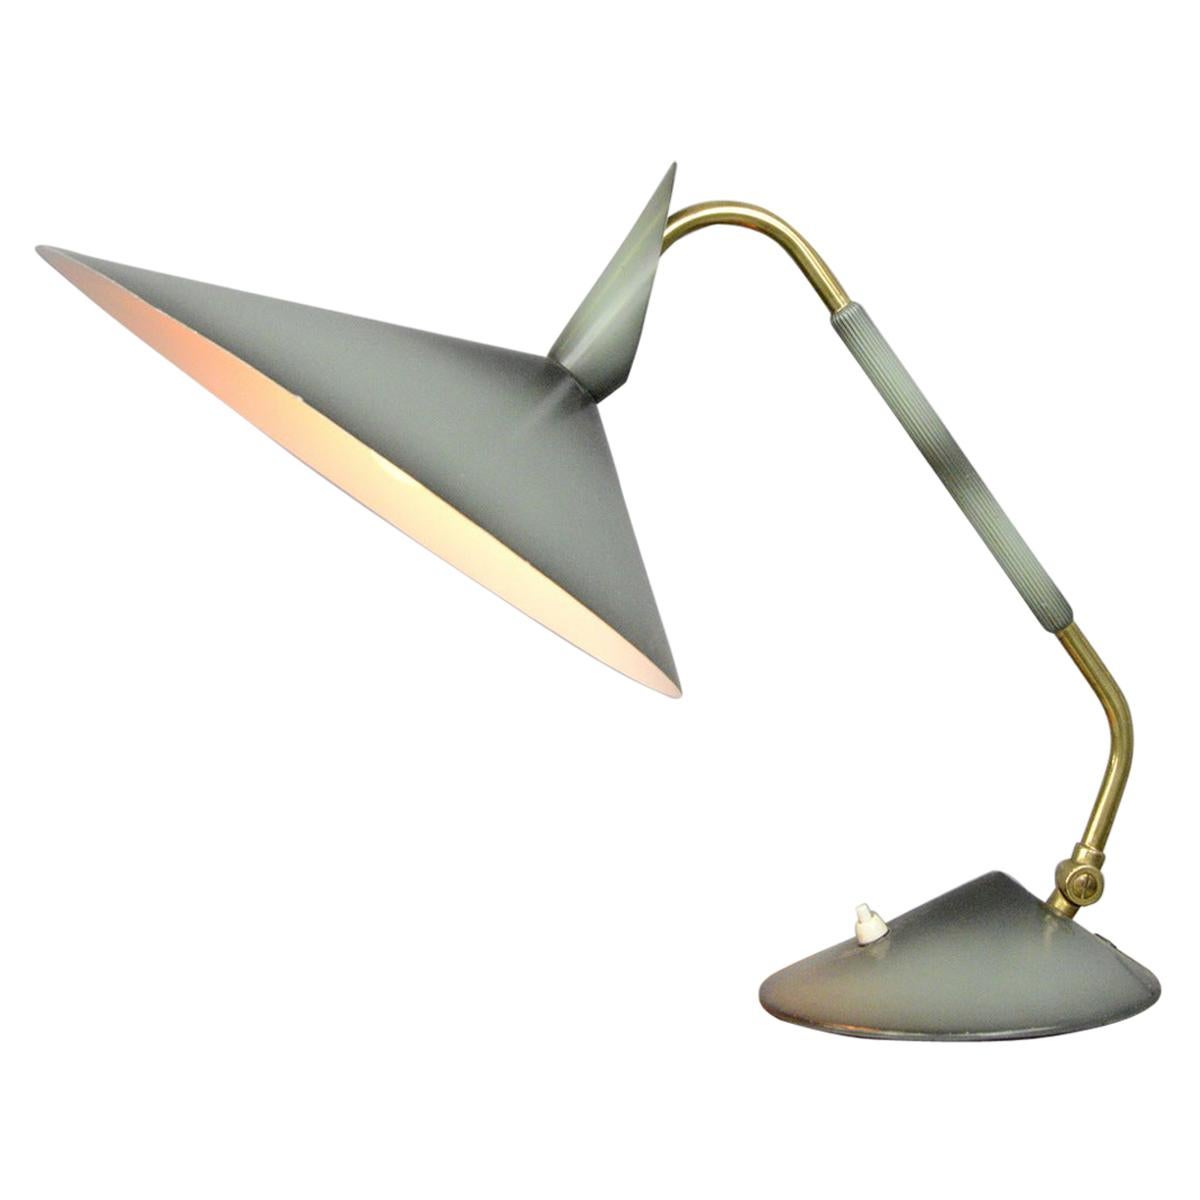 Midcentury Table Lamp by Helo, circa 1960s